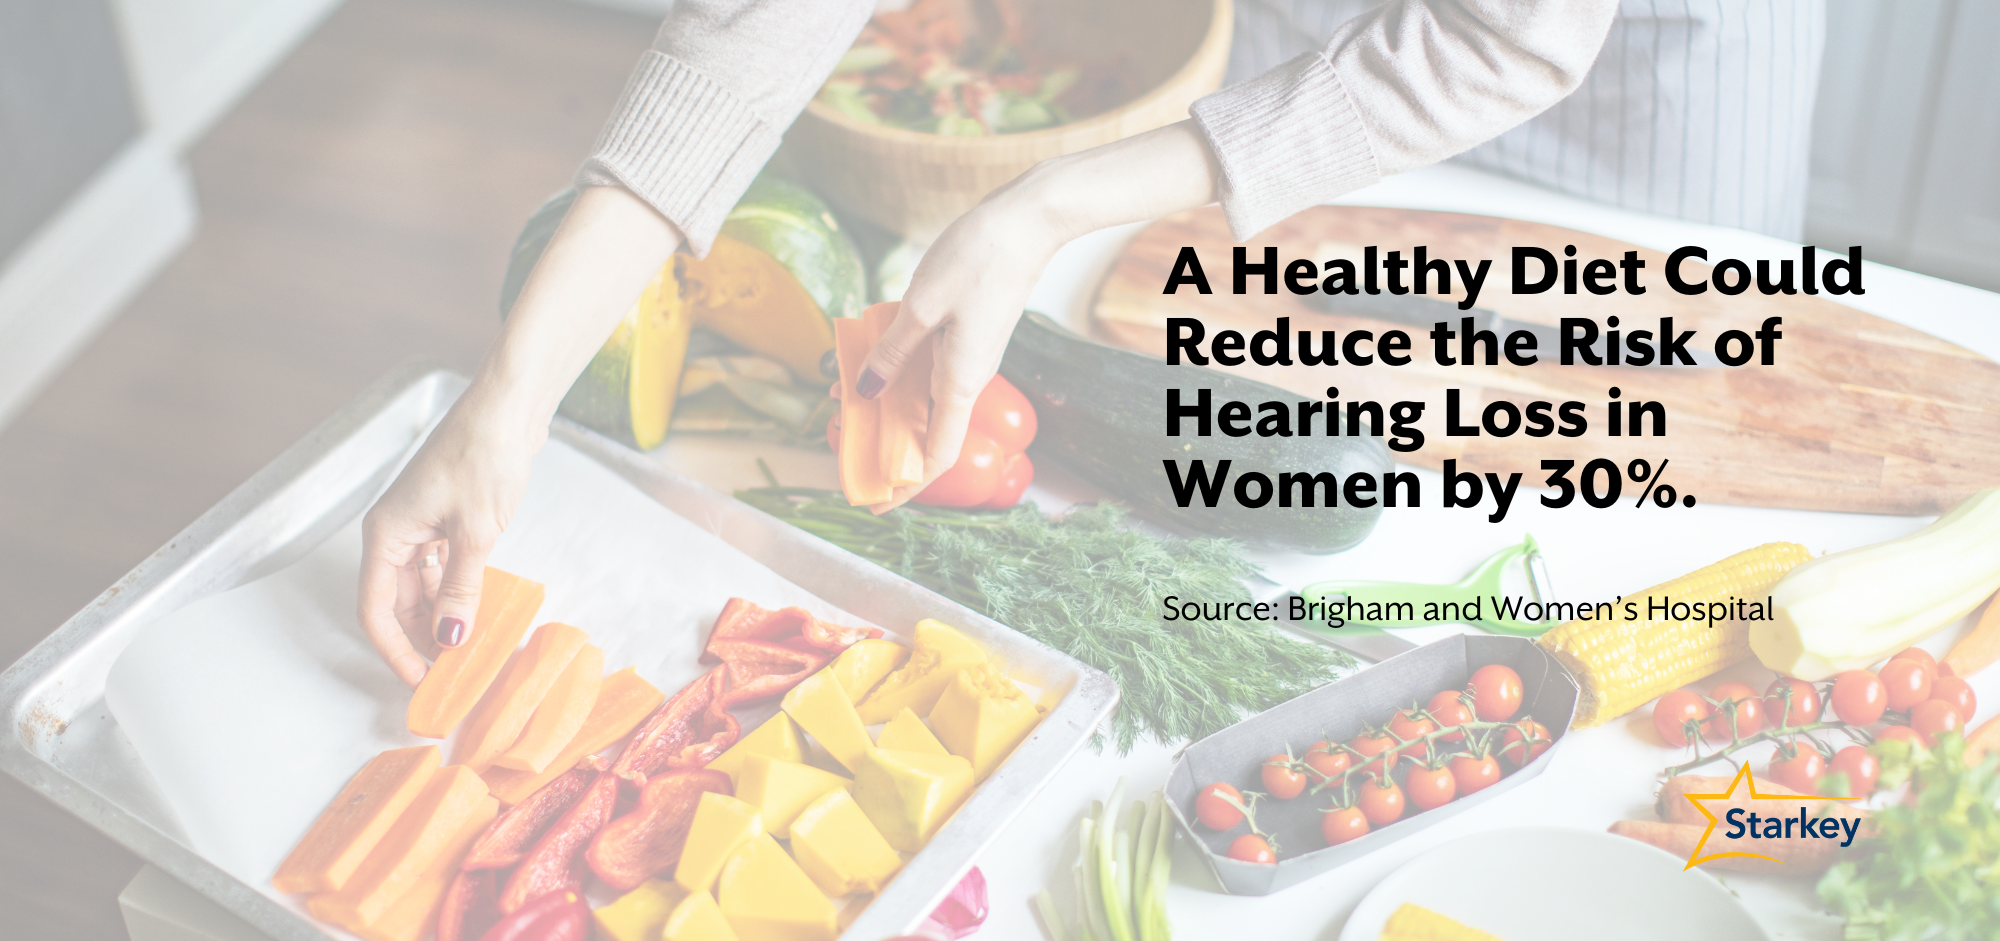 A Healthy Diet Could Reduce the Risk of Hearing Loss in  Women by 30%.